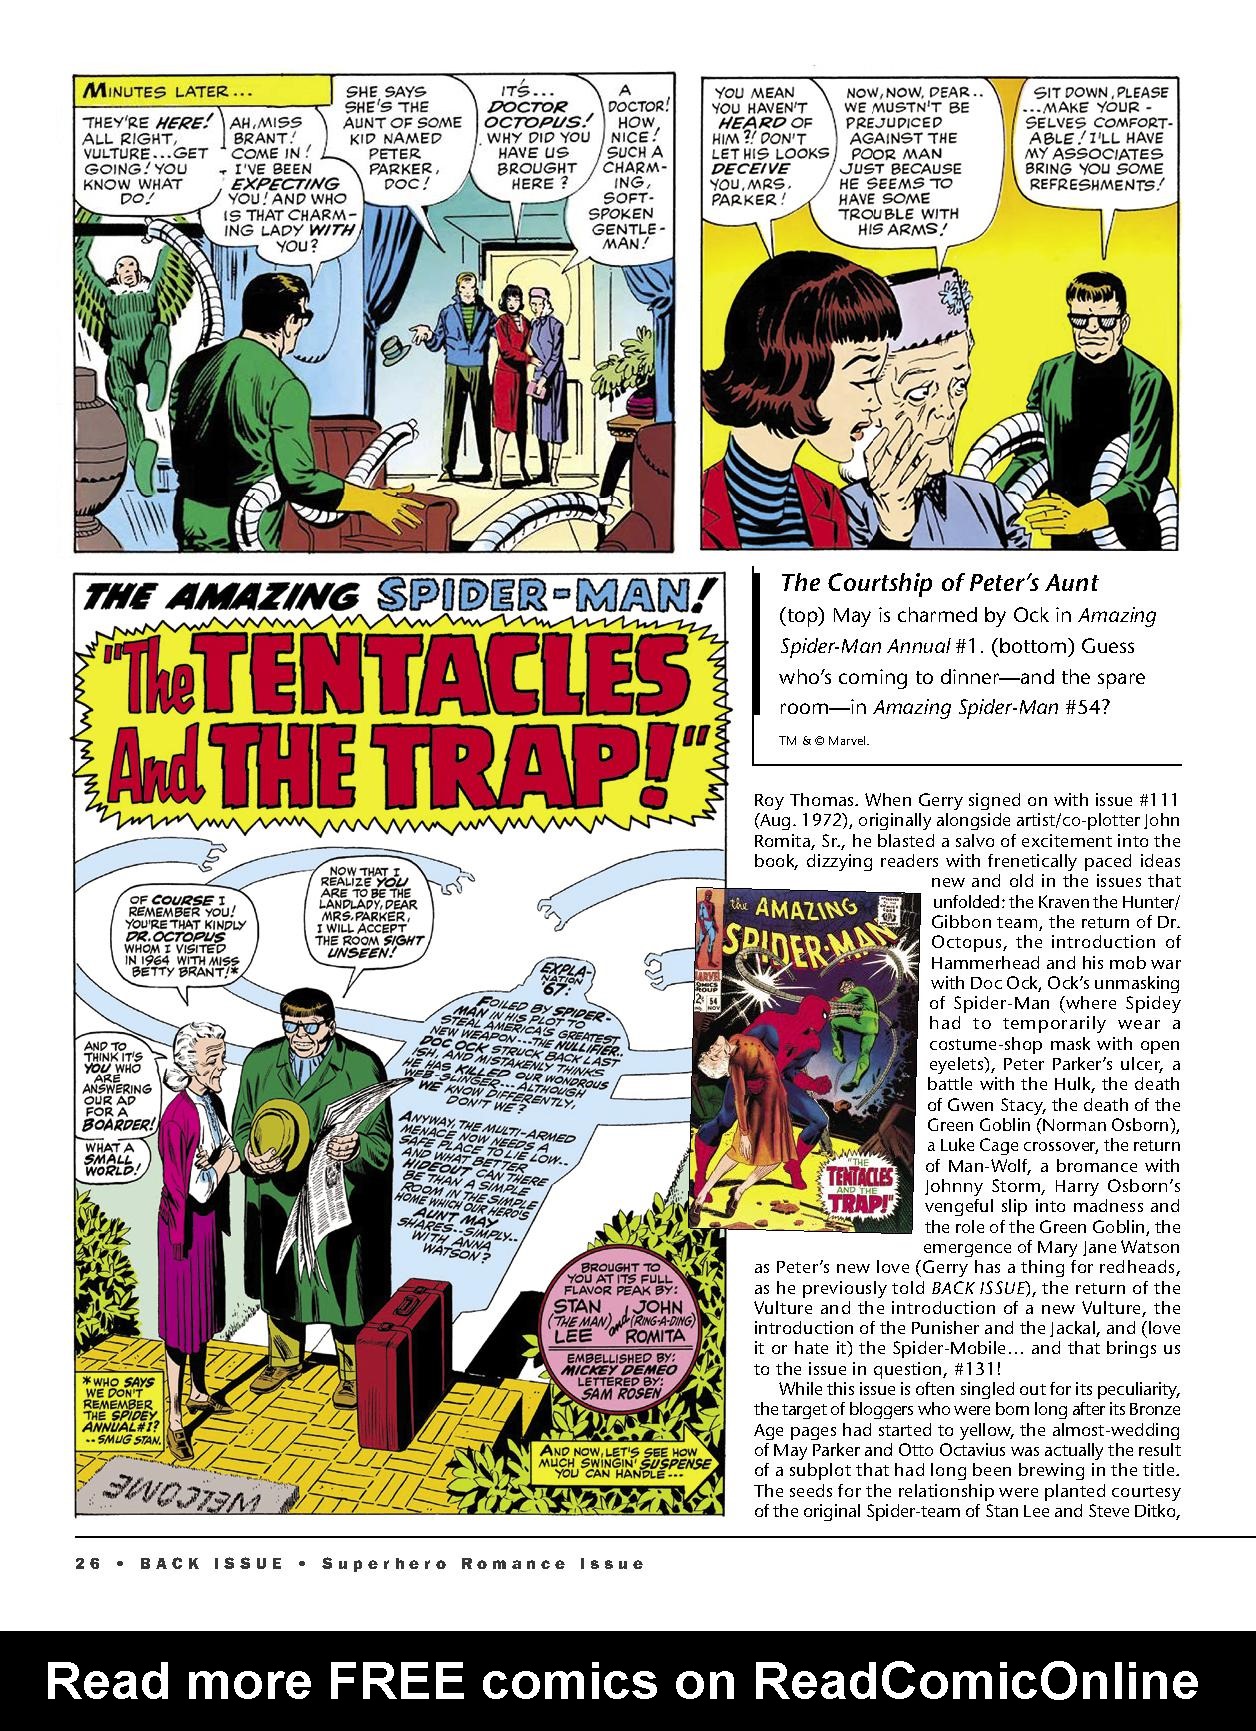 Read online Back Issue comic -  Issue #123 - 28